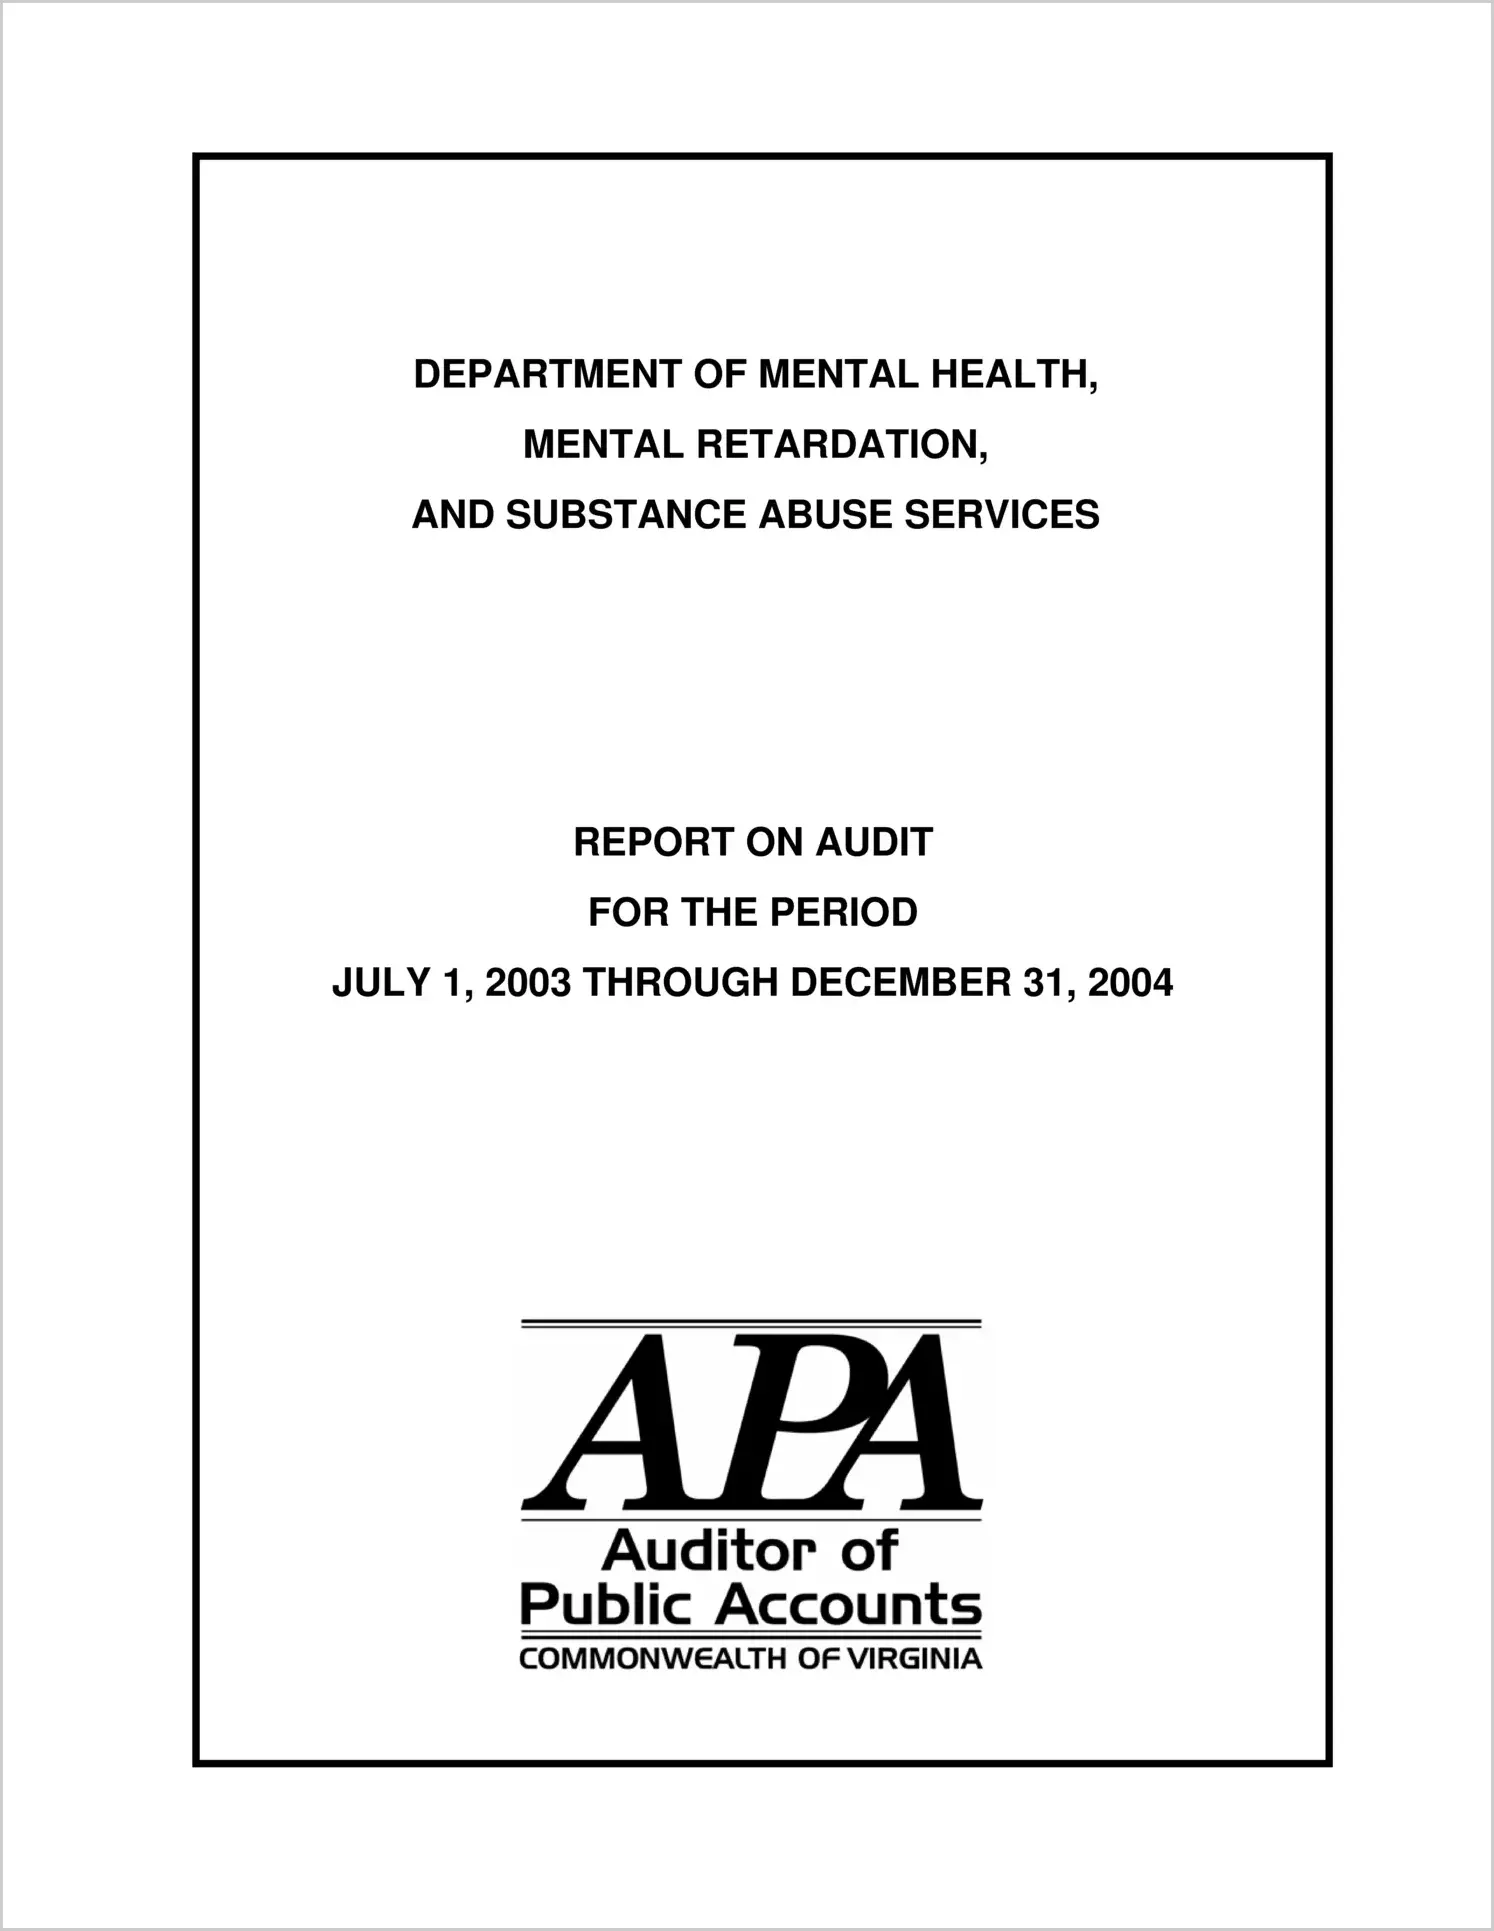 Department of Mental Health, Mental Retardation, and Substance Abuse Services for the year ended June 30, 2004